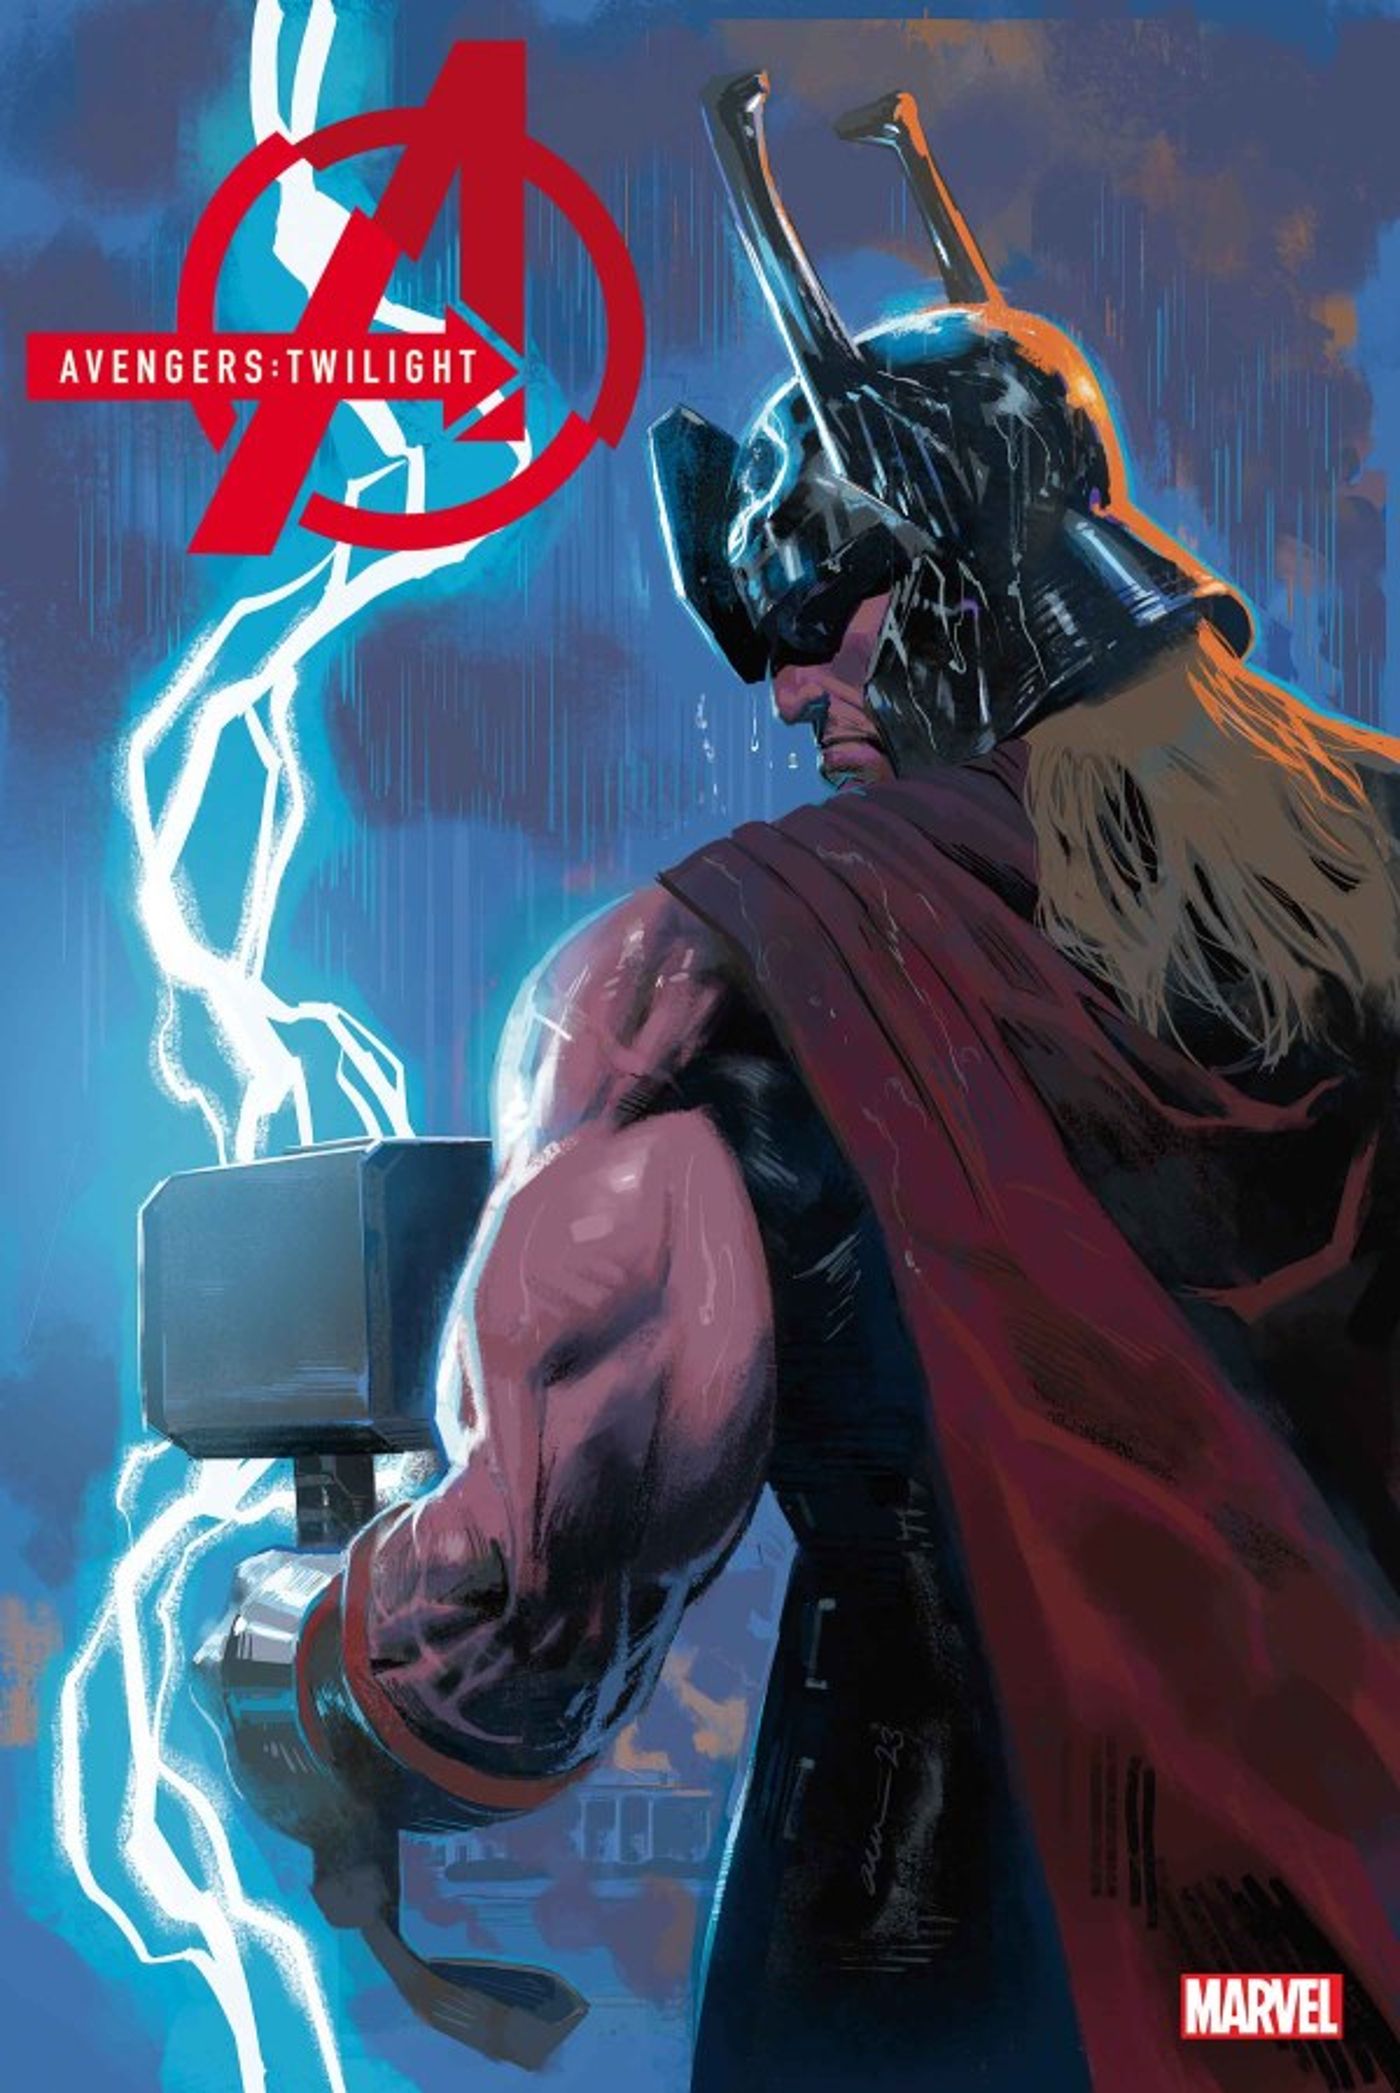 Thor and Mjolnir on the cover of Avengers Twilight #4